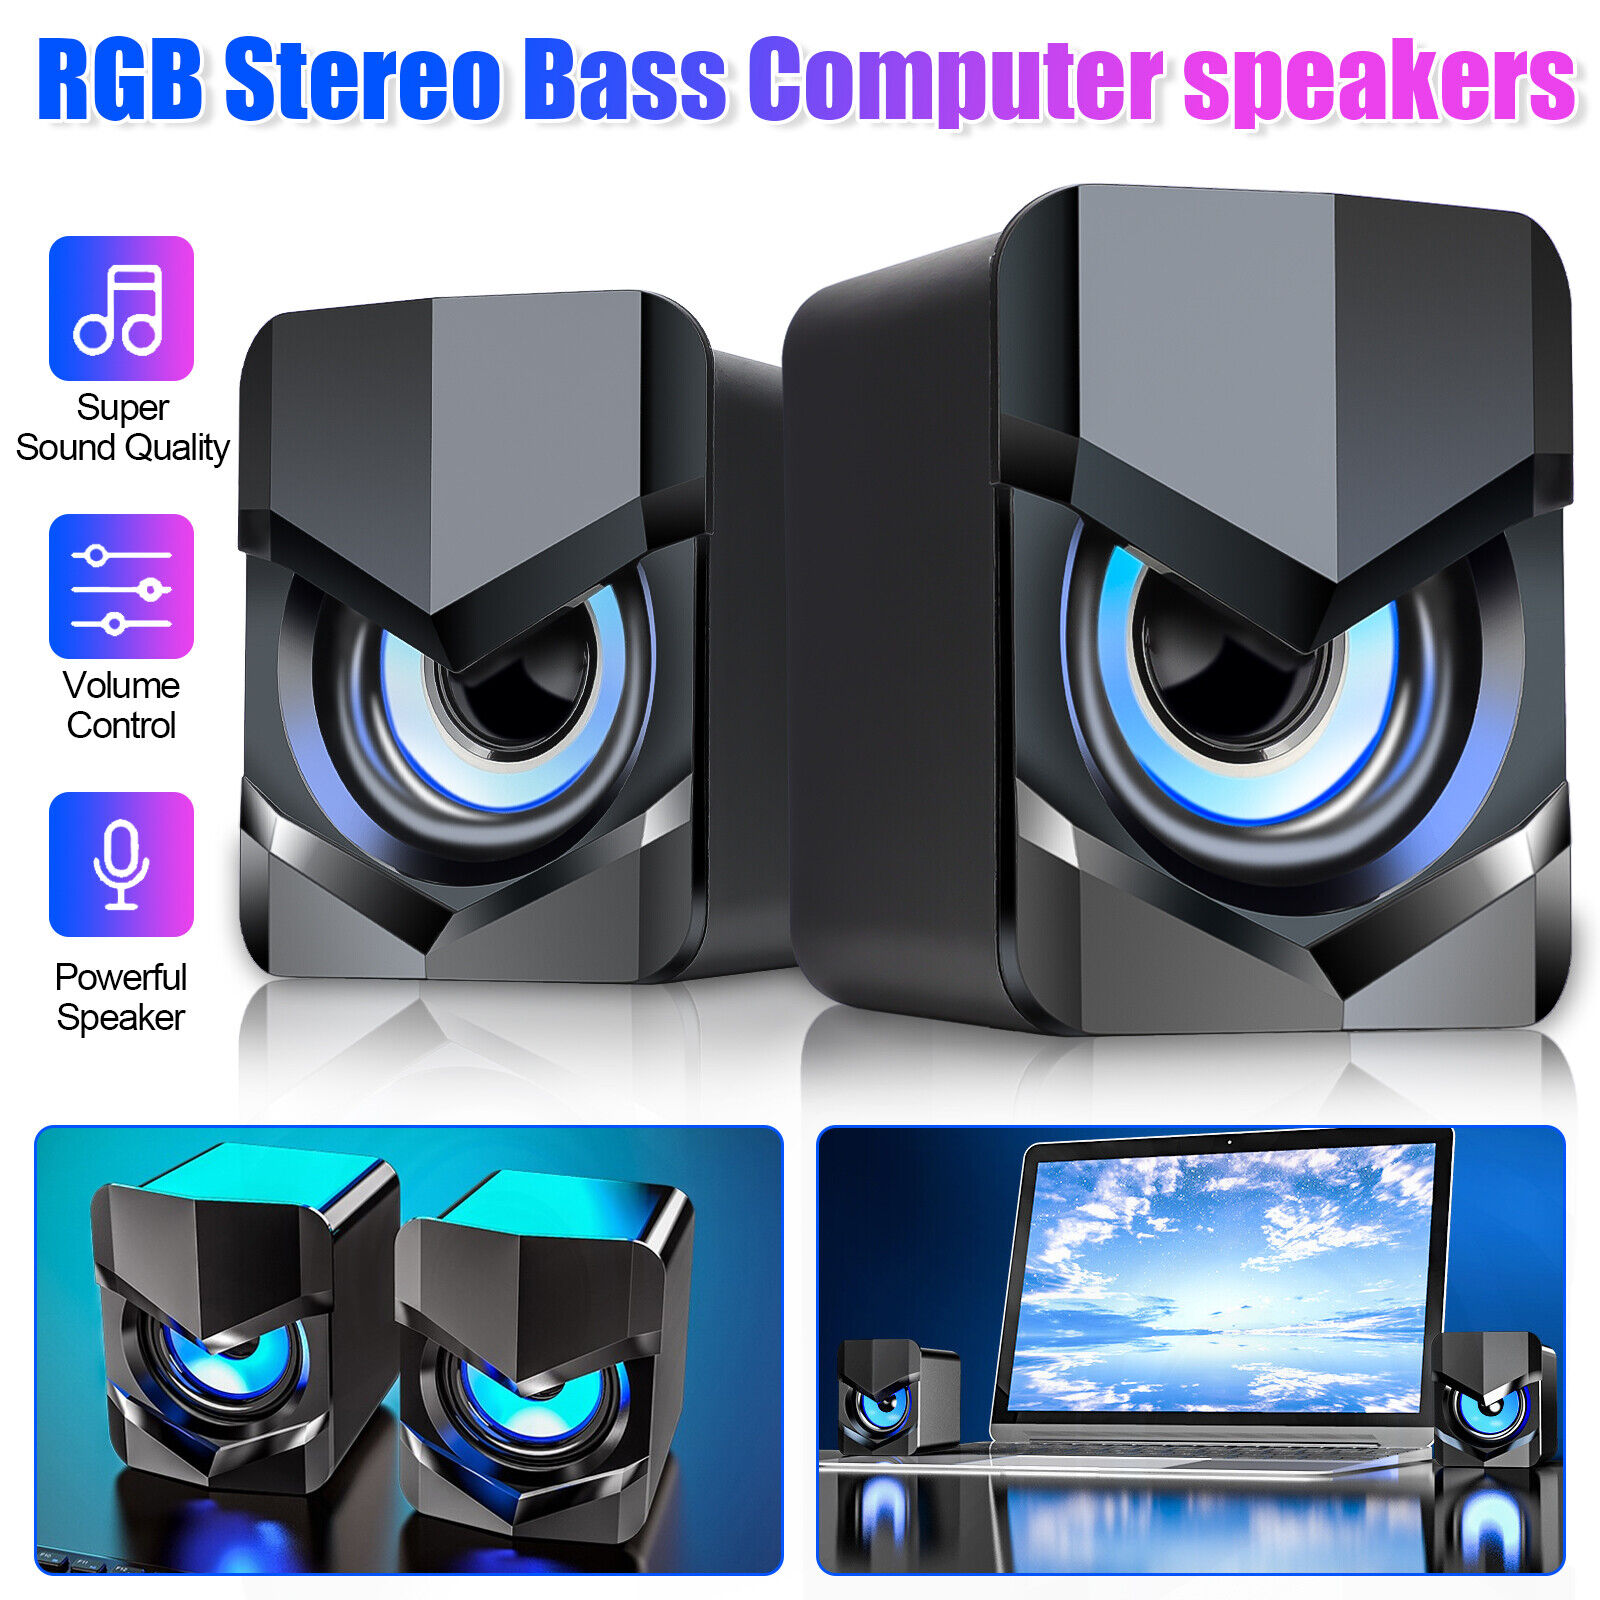 Stereo Bass Sound USB Computer Speakers 2.0 Channel USB Wired for Laptop Desktop